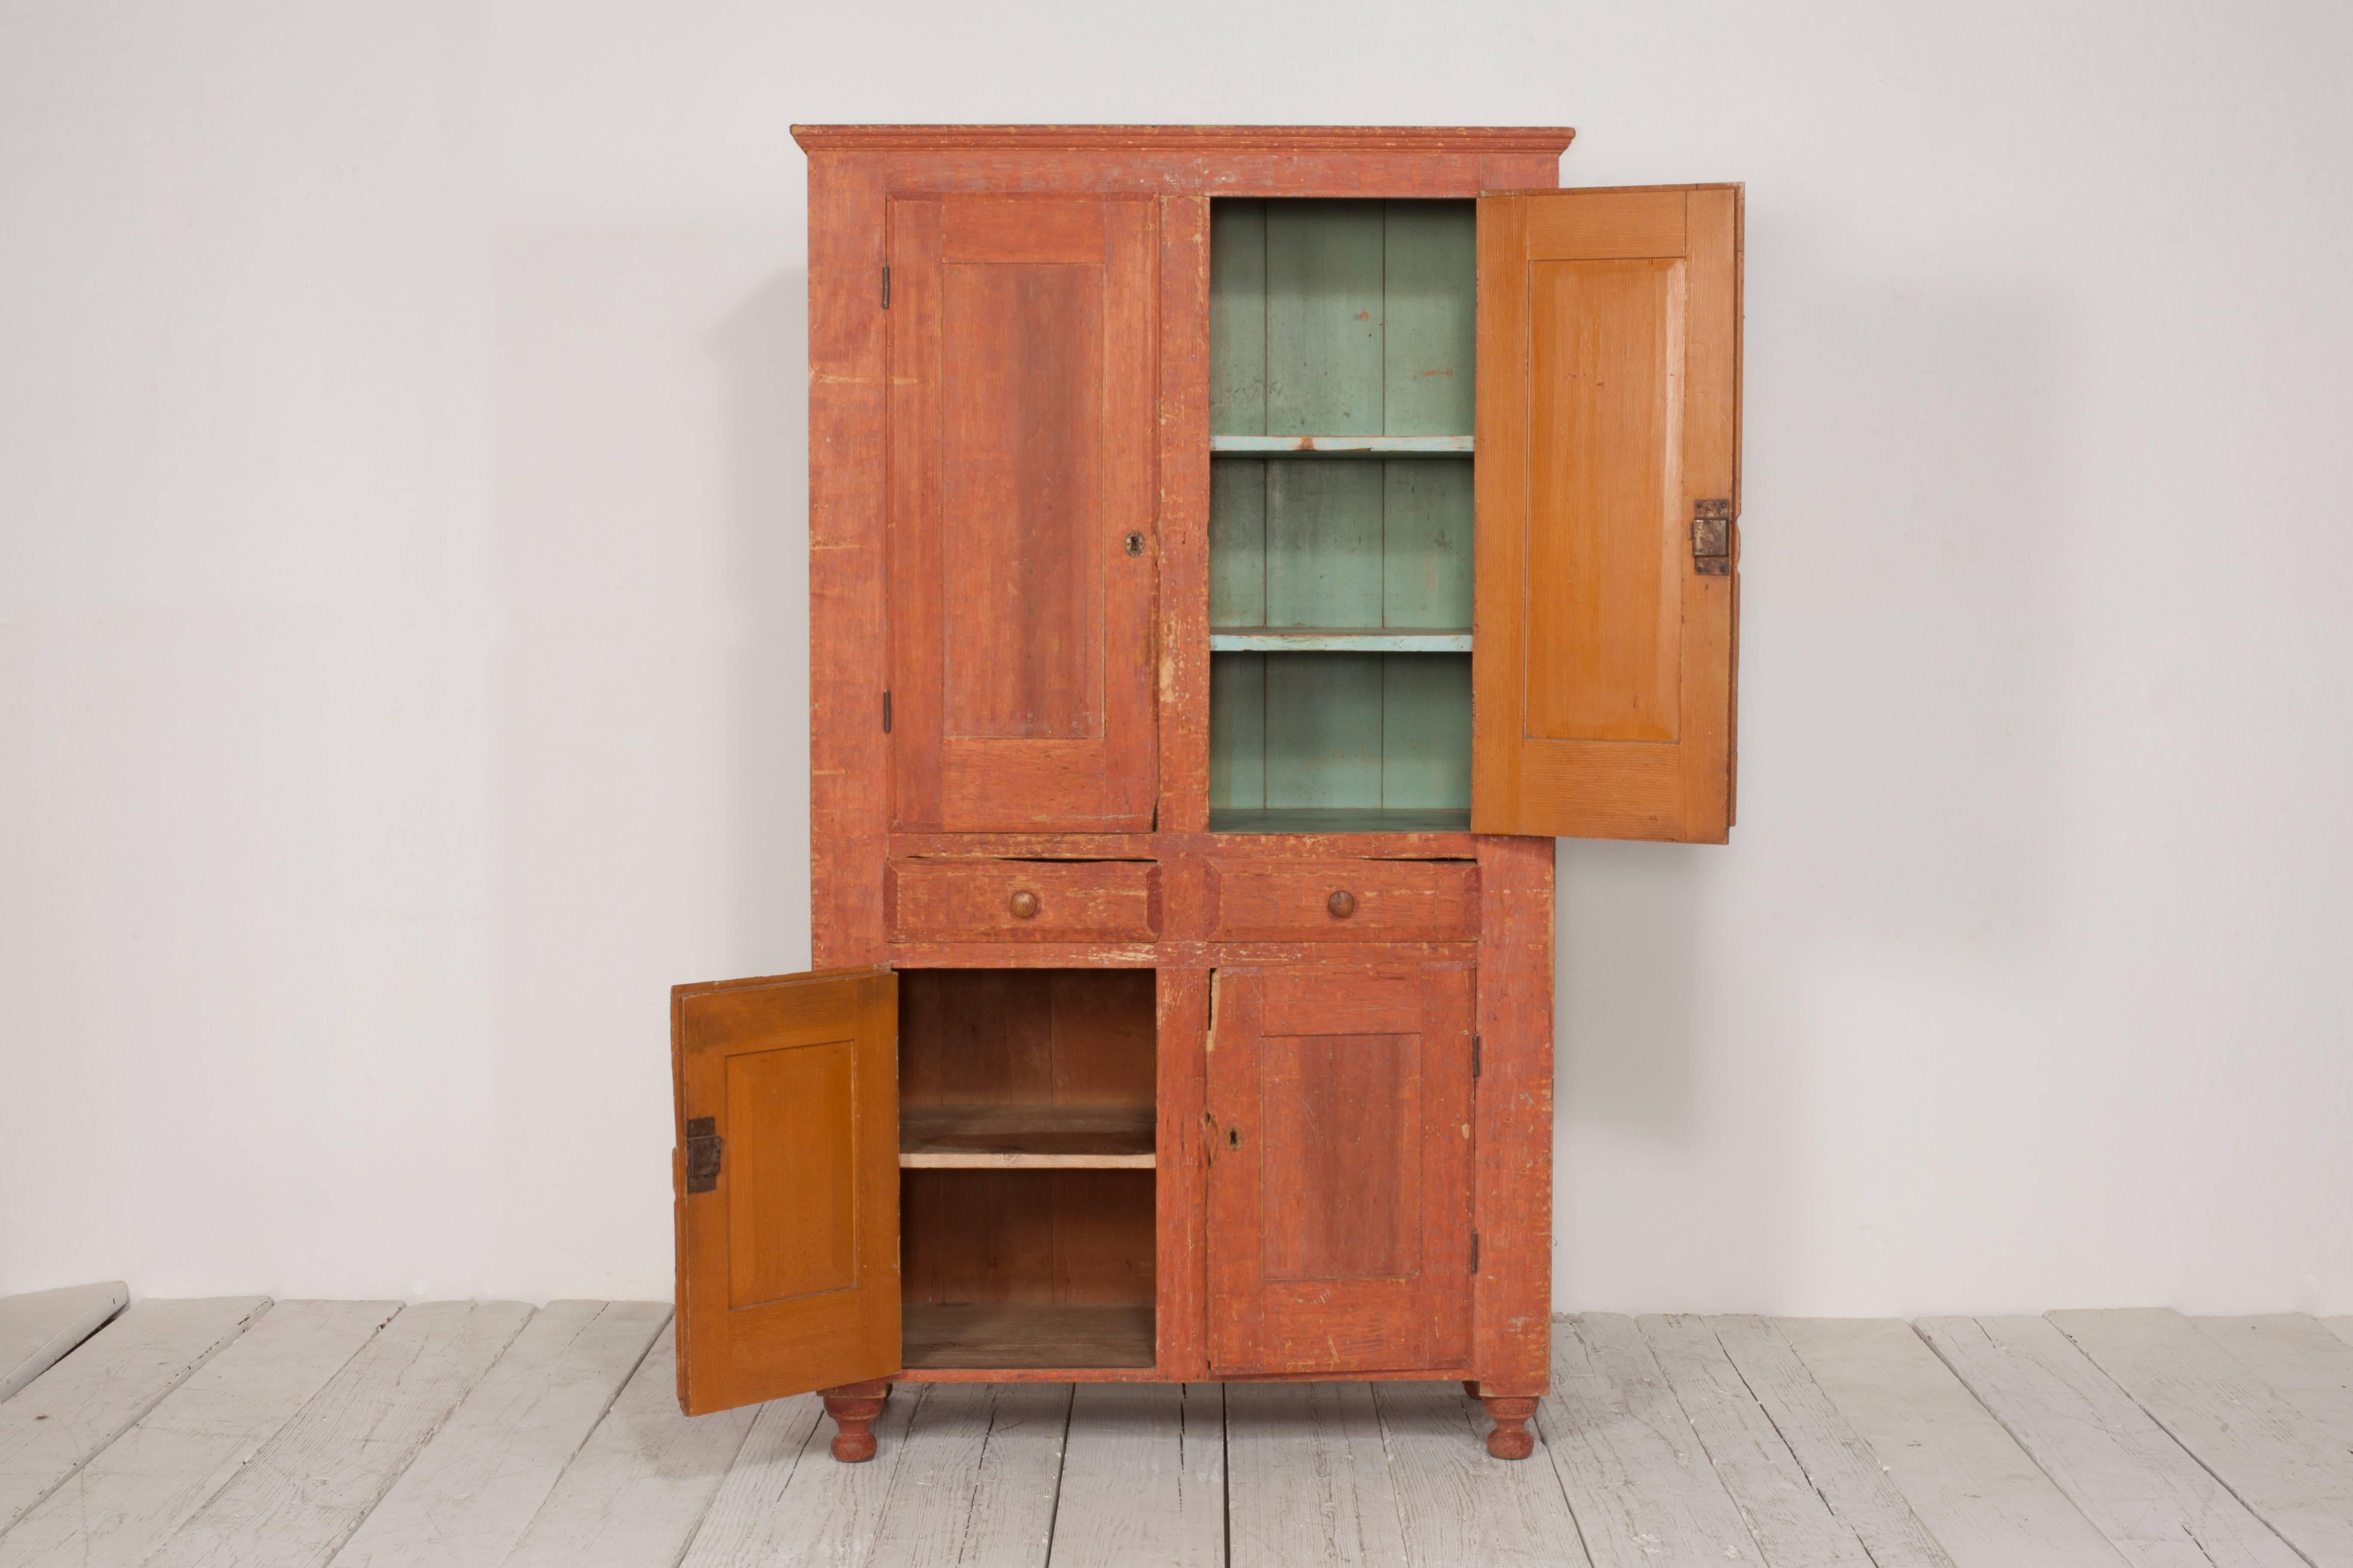 Early American terra cotta stained cabinet with four doors and two drawers. Interior is painted the original blue accent details.